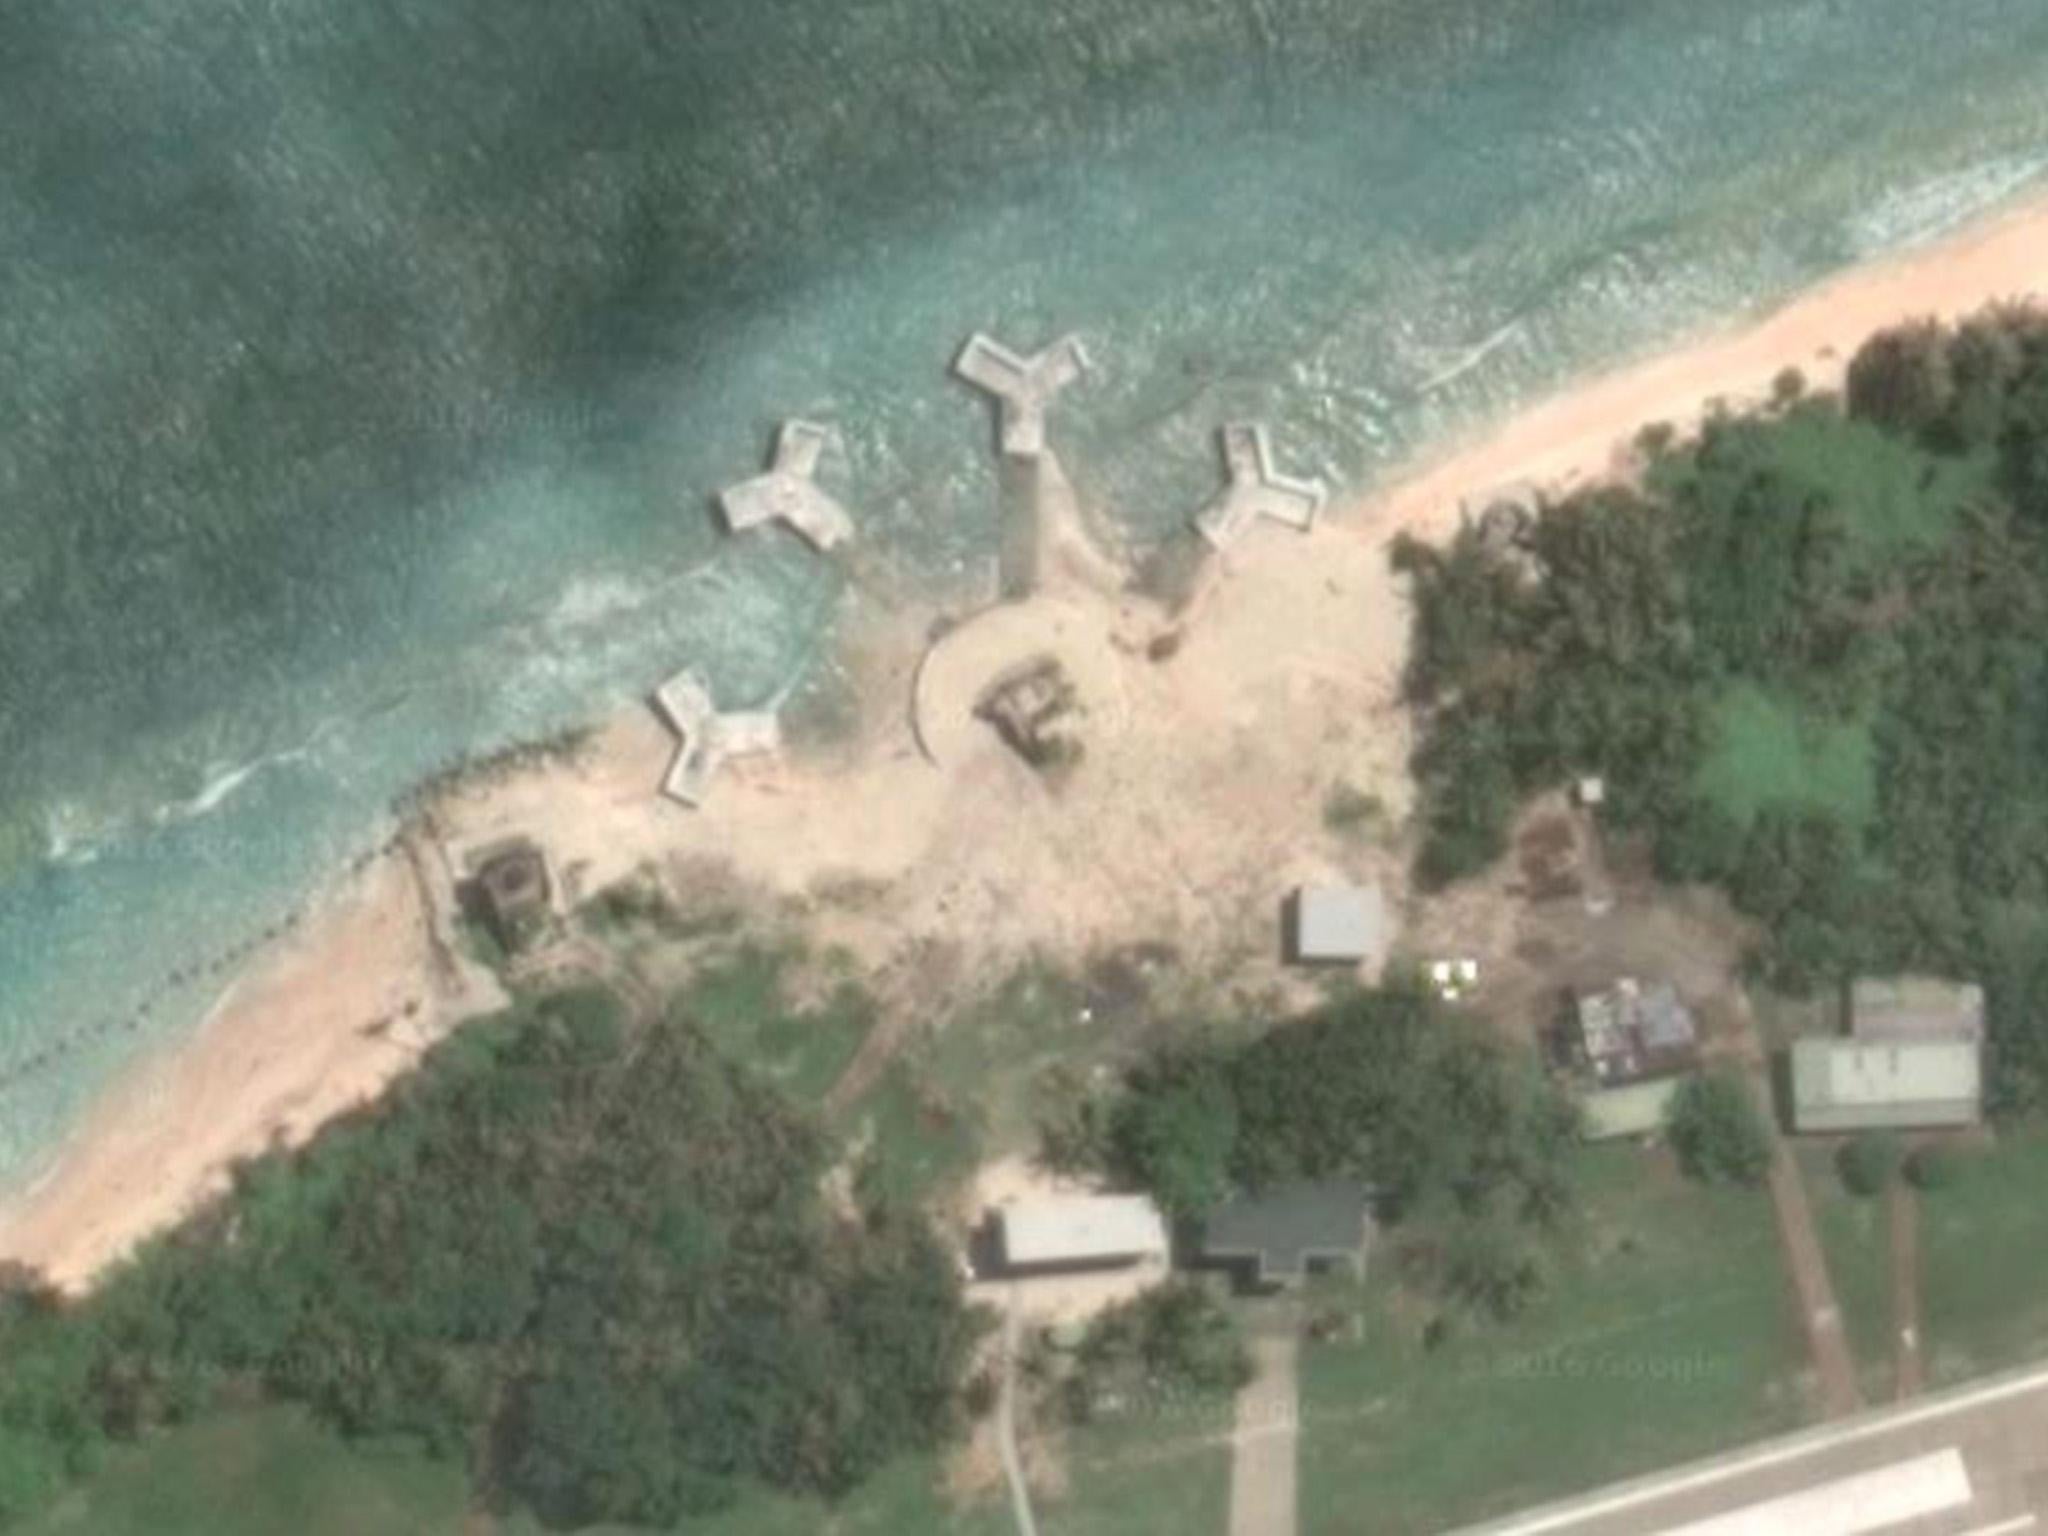 The buildings have been constructed on the disputed Taiping Island on the Spratly archipelago